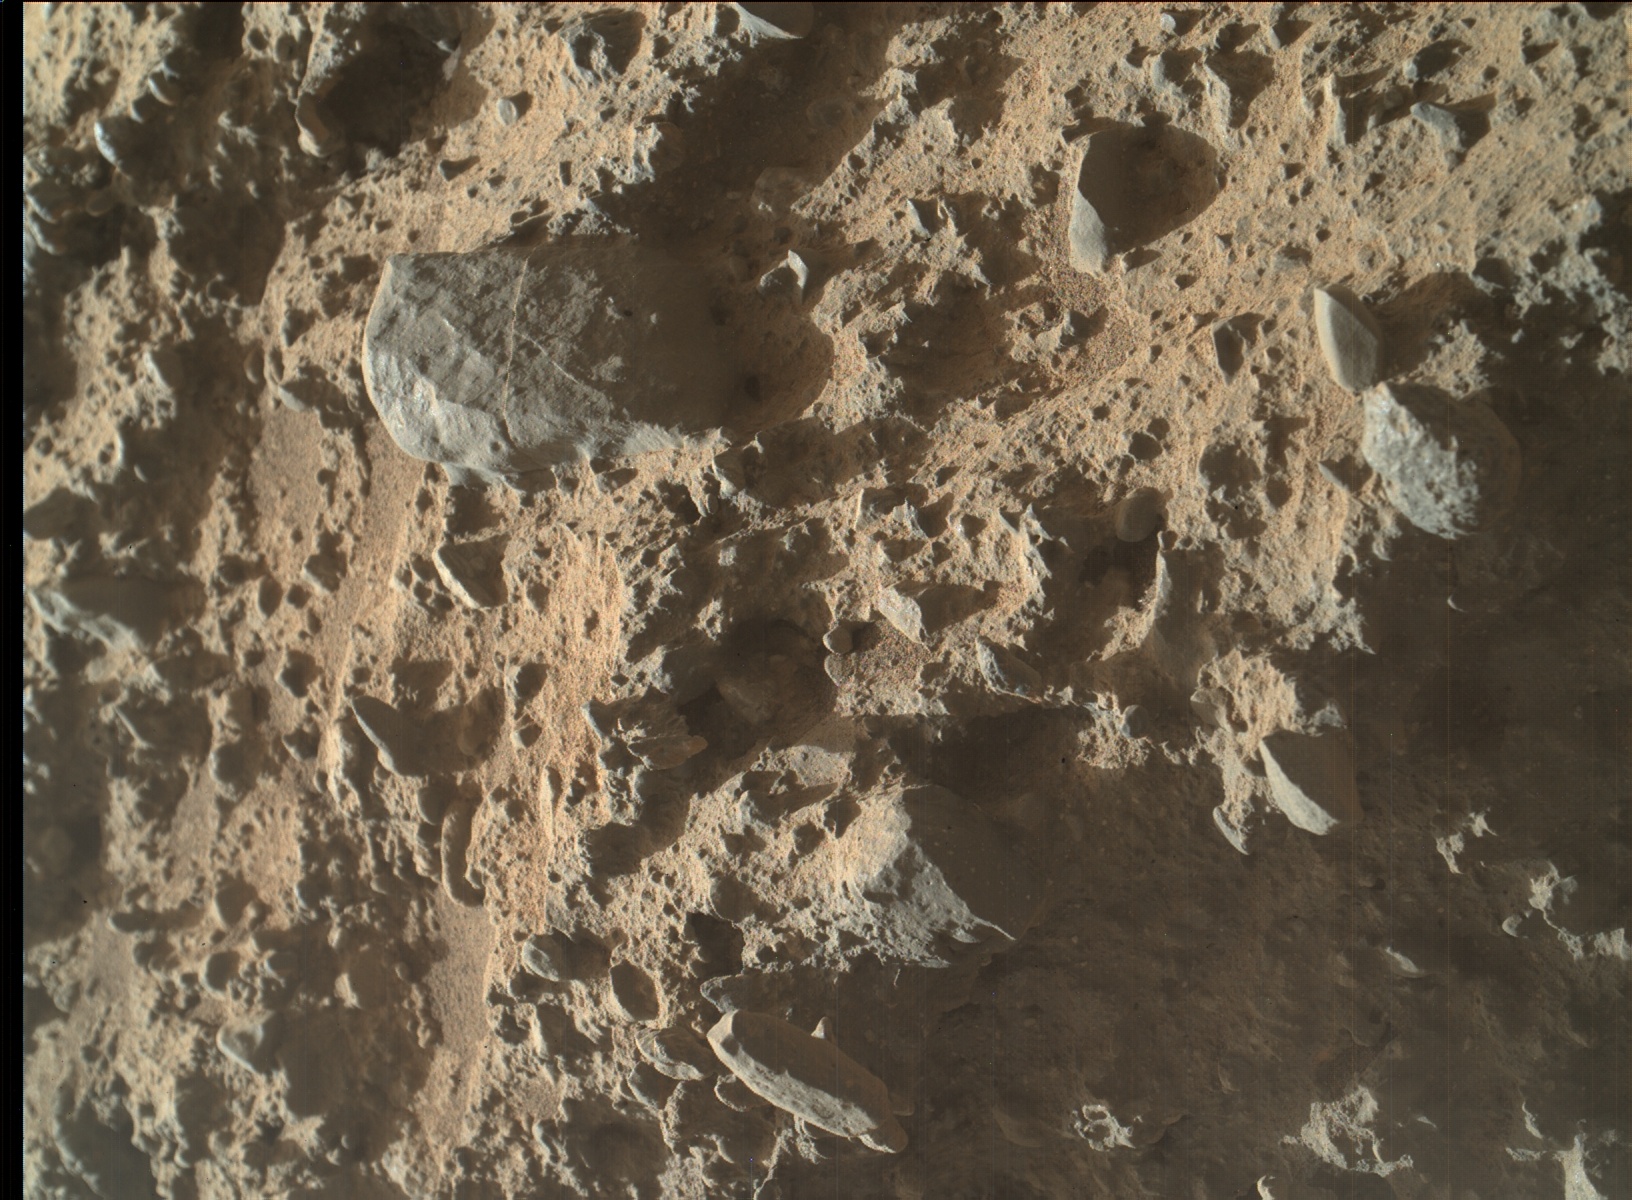 Nasa's Mars rover Curiosity acquired this image using its Mars Hand Lens Imager (MAHLI) on Sol 1407